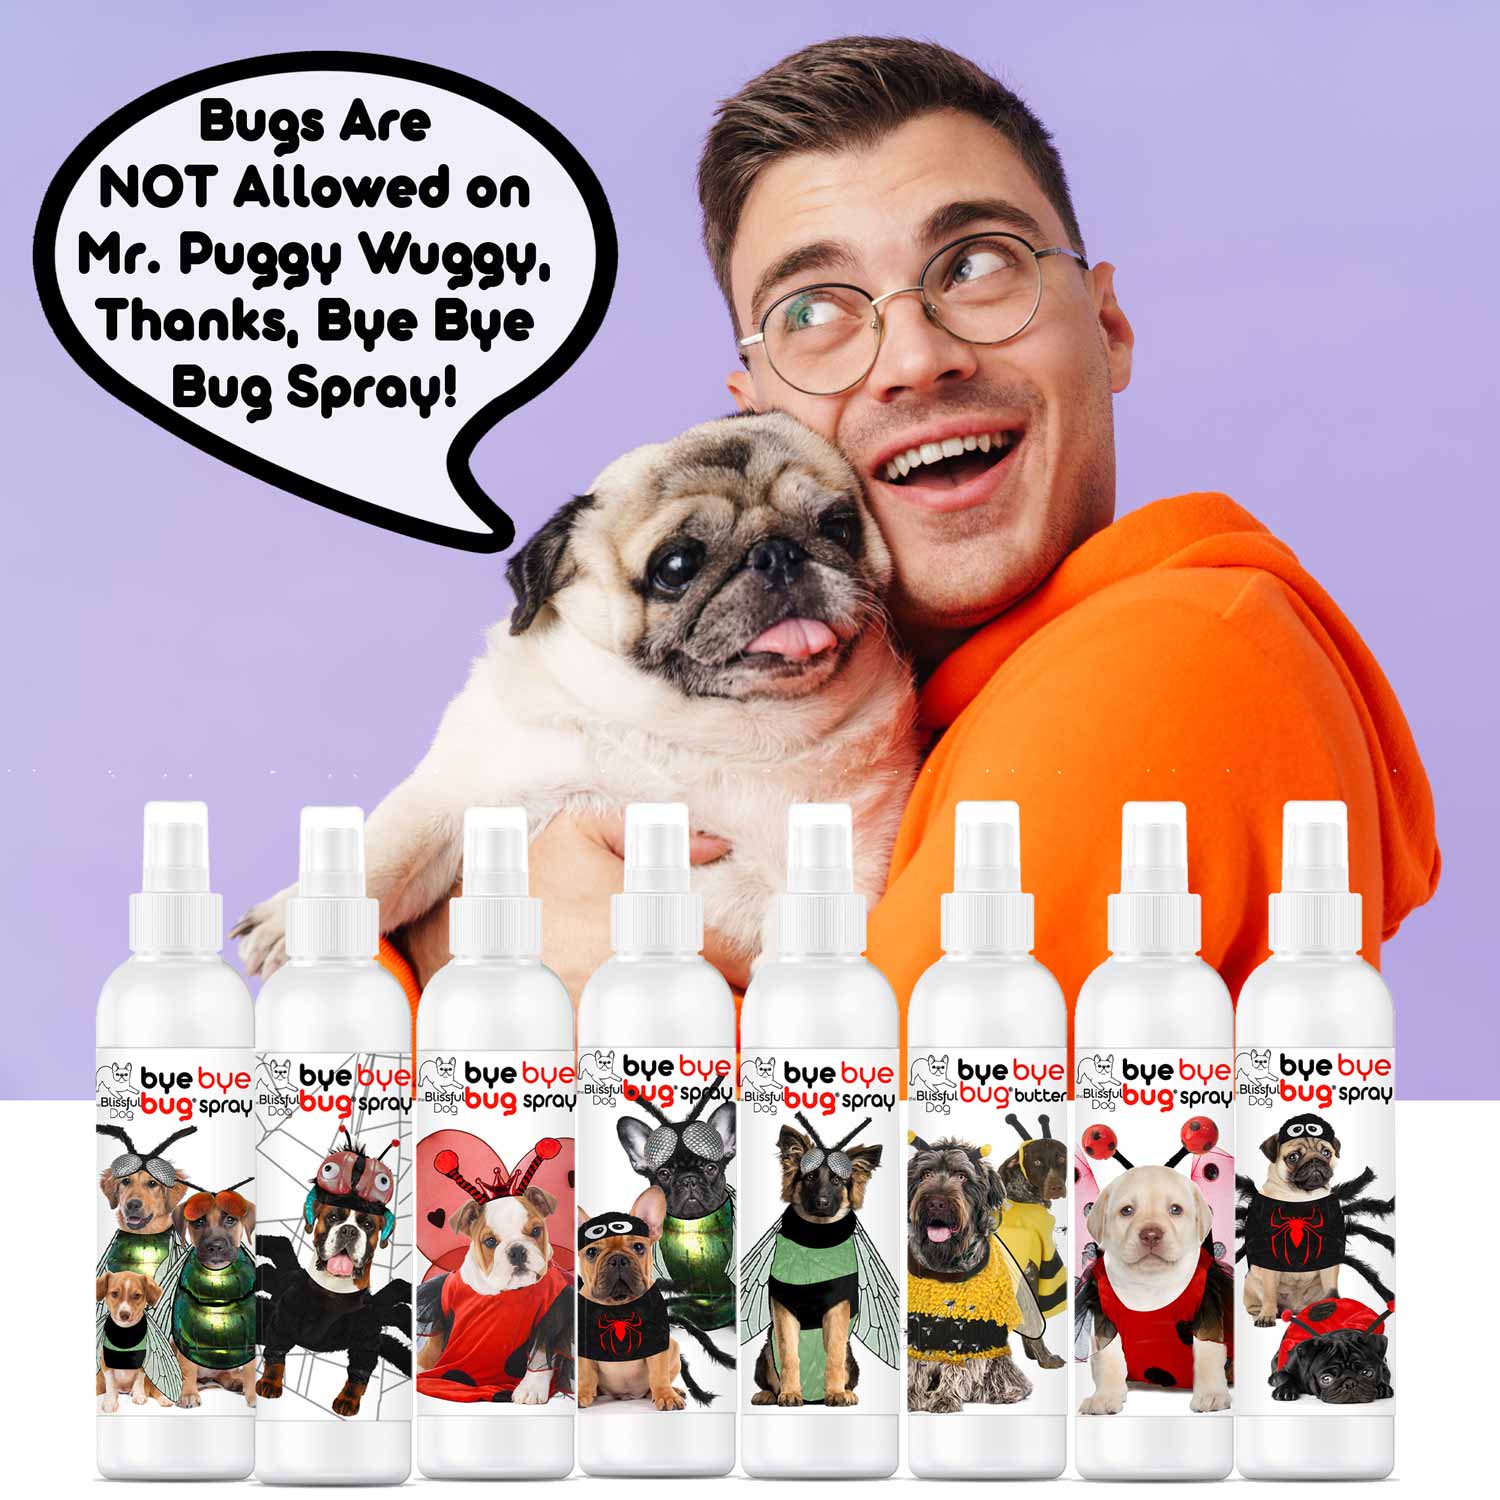 Bye Bye Boo Boo™ Natural Herbal Dog Spray for Itchy Dogs